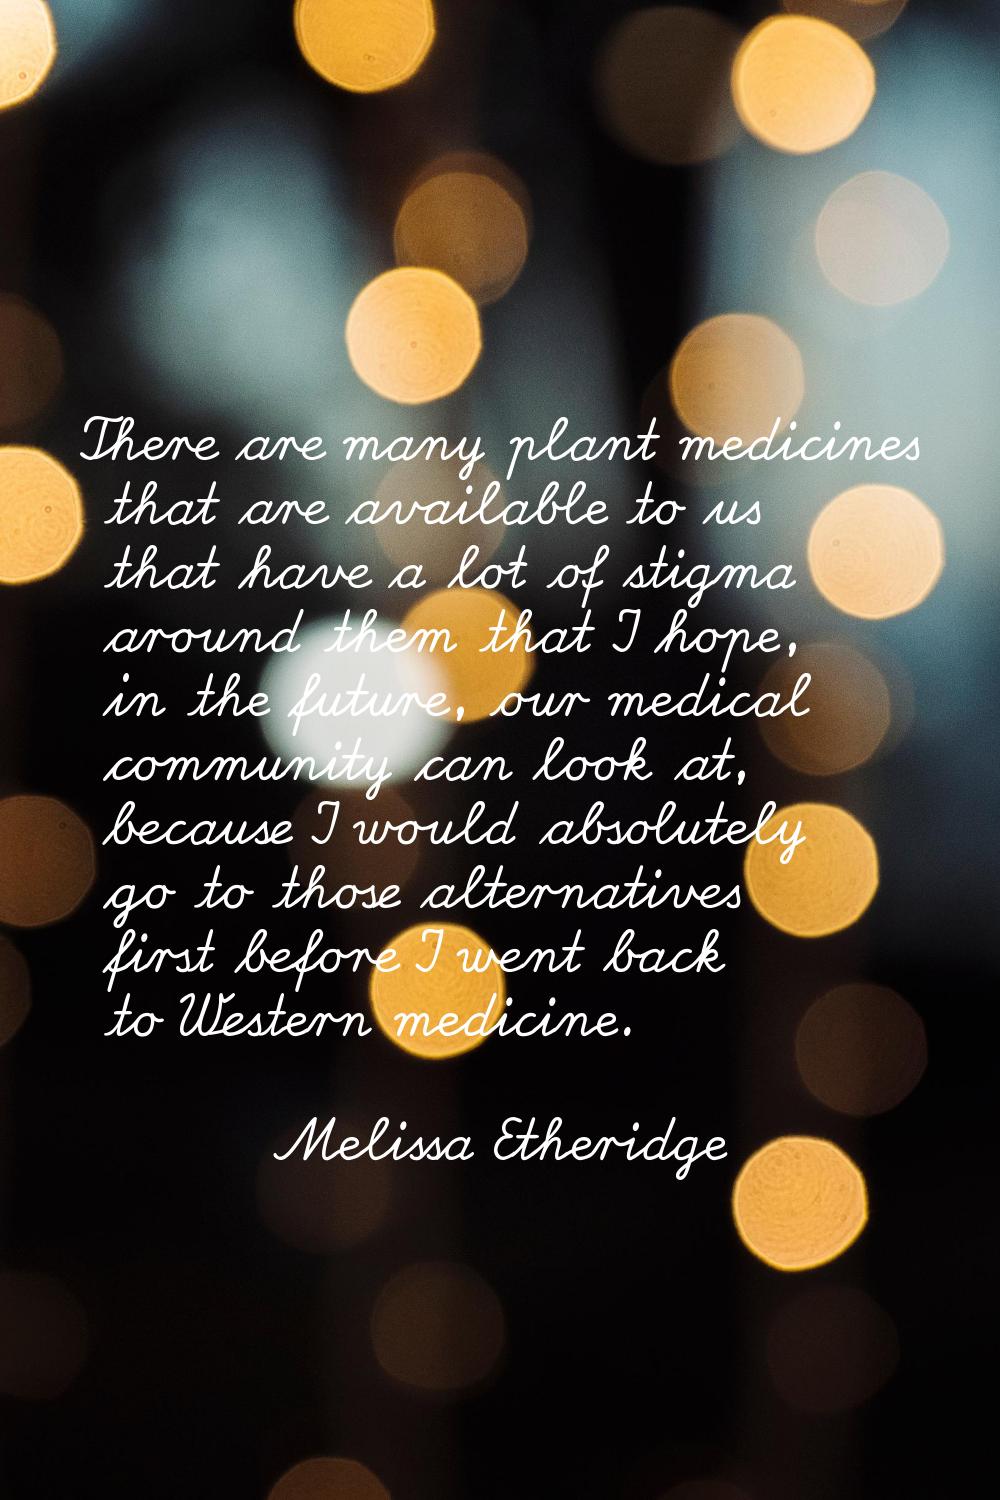 There are many plant medicines that are available to us that have a lot of stigma around them that 